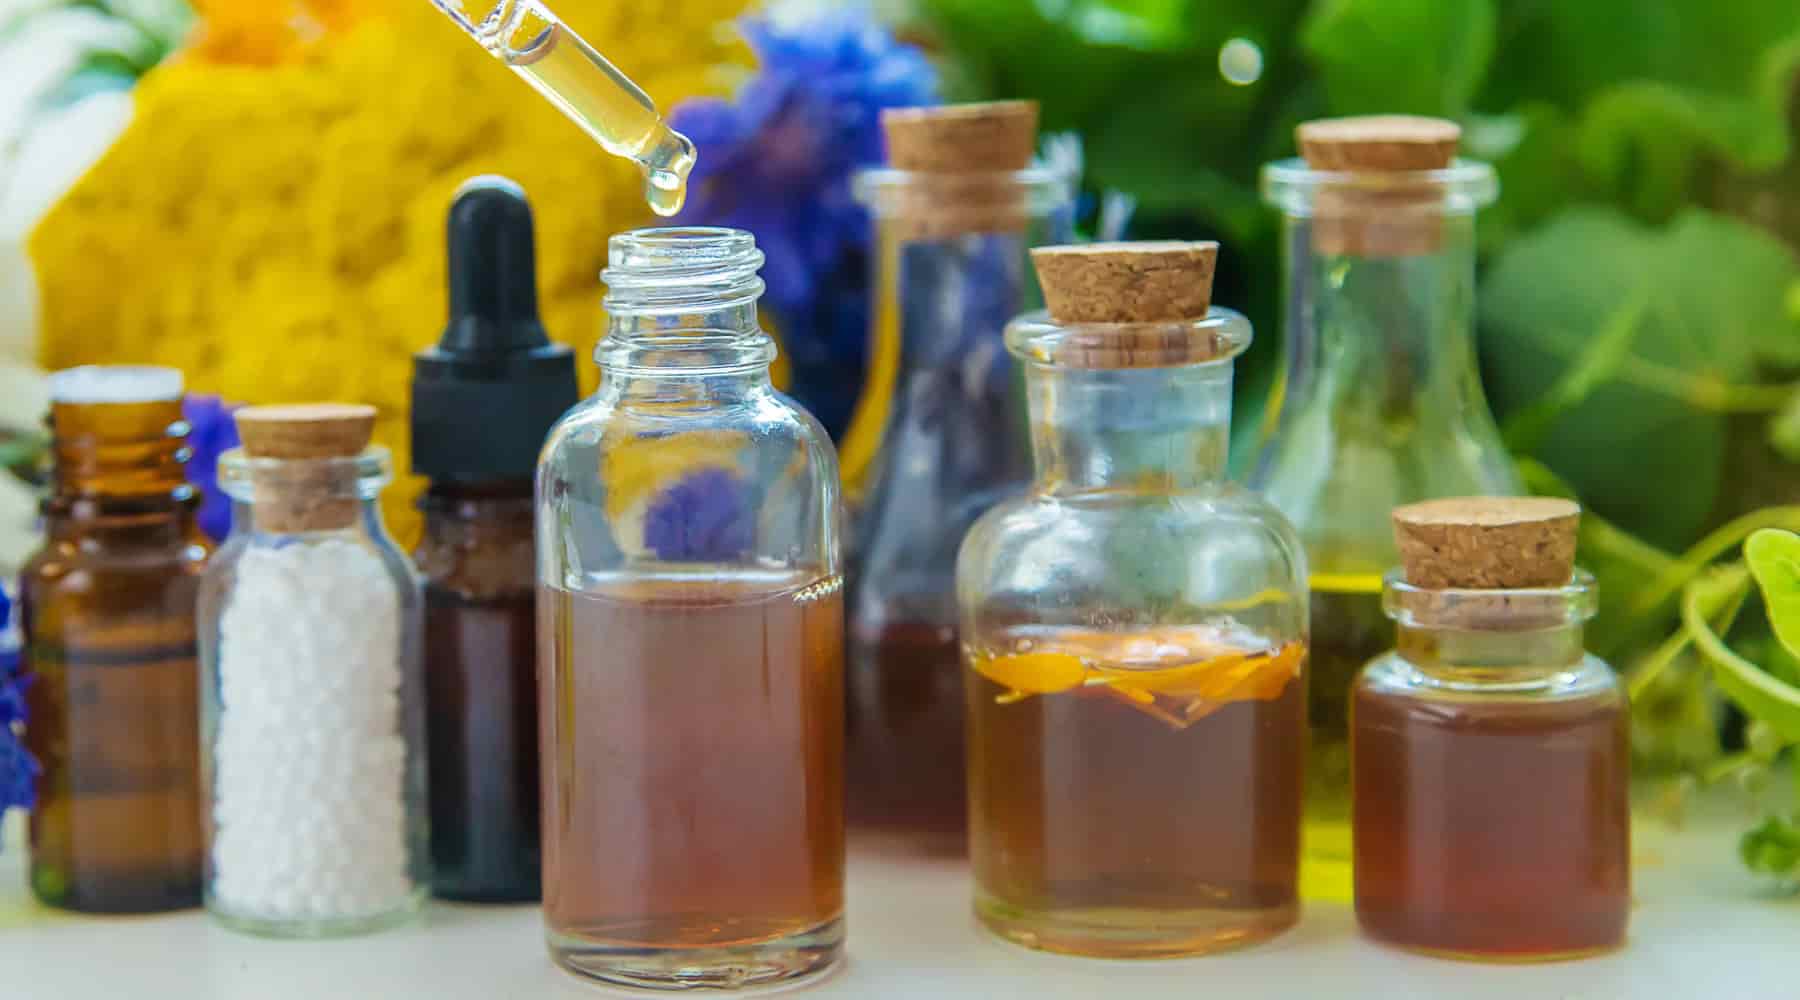 Homeopathy, Essential Oils, and Herbal Tinctures: What is the difference?